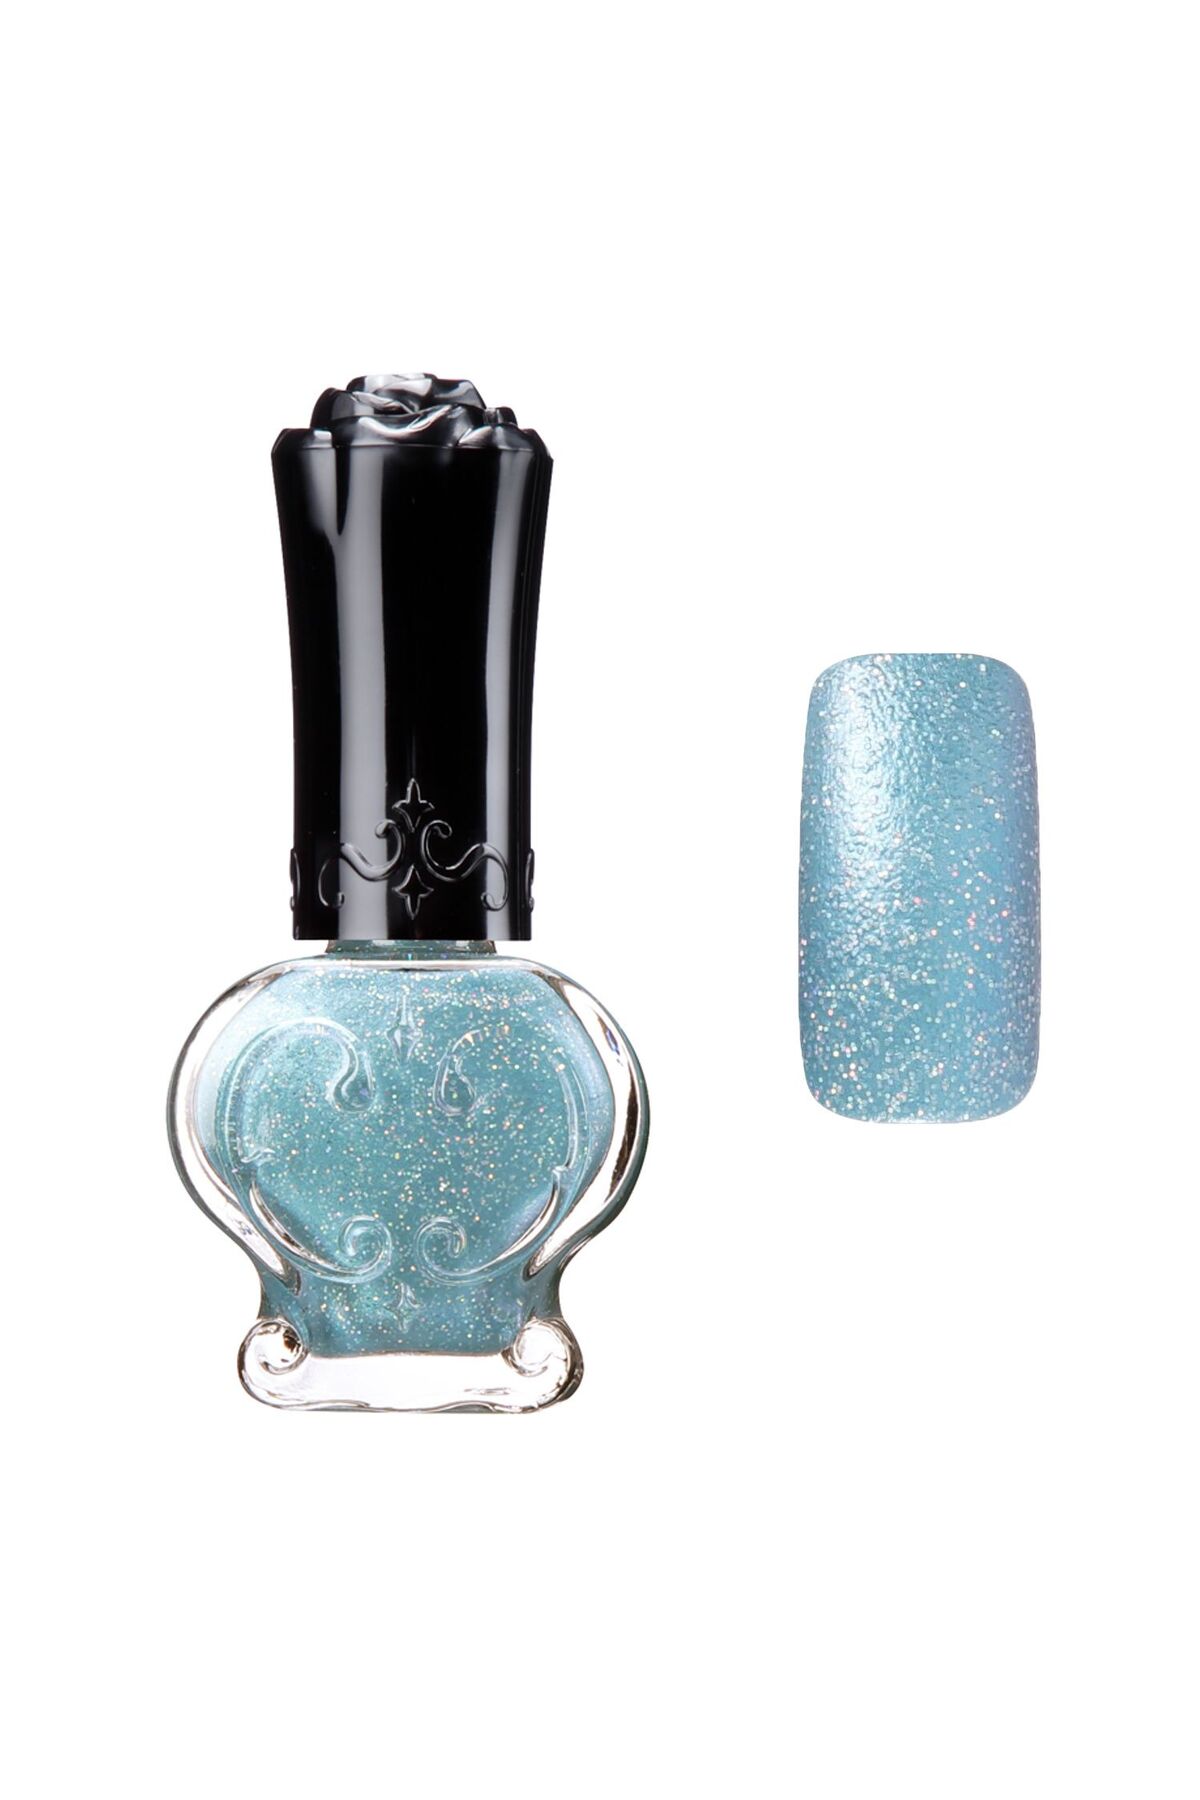 15 Spring Nail Polish Colors You Need For Warm Weather Manis In 2016 —  PHOTOS